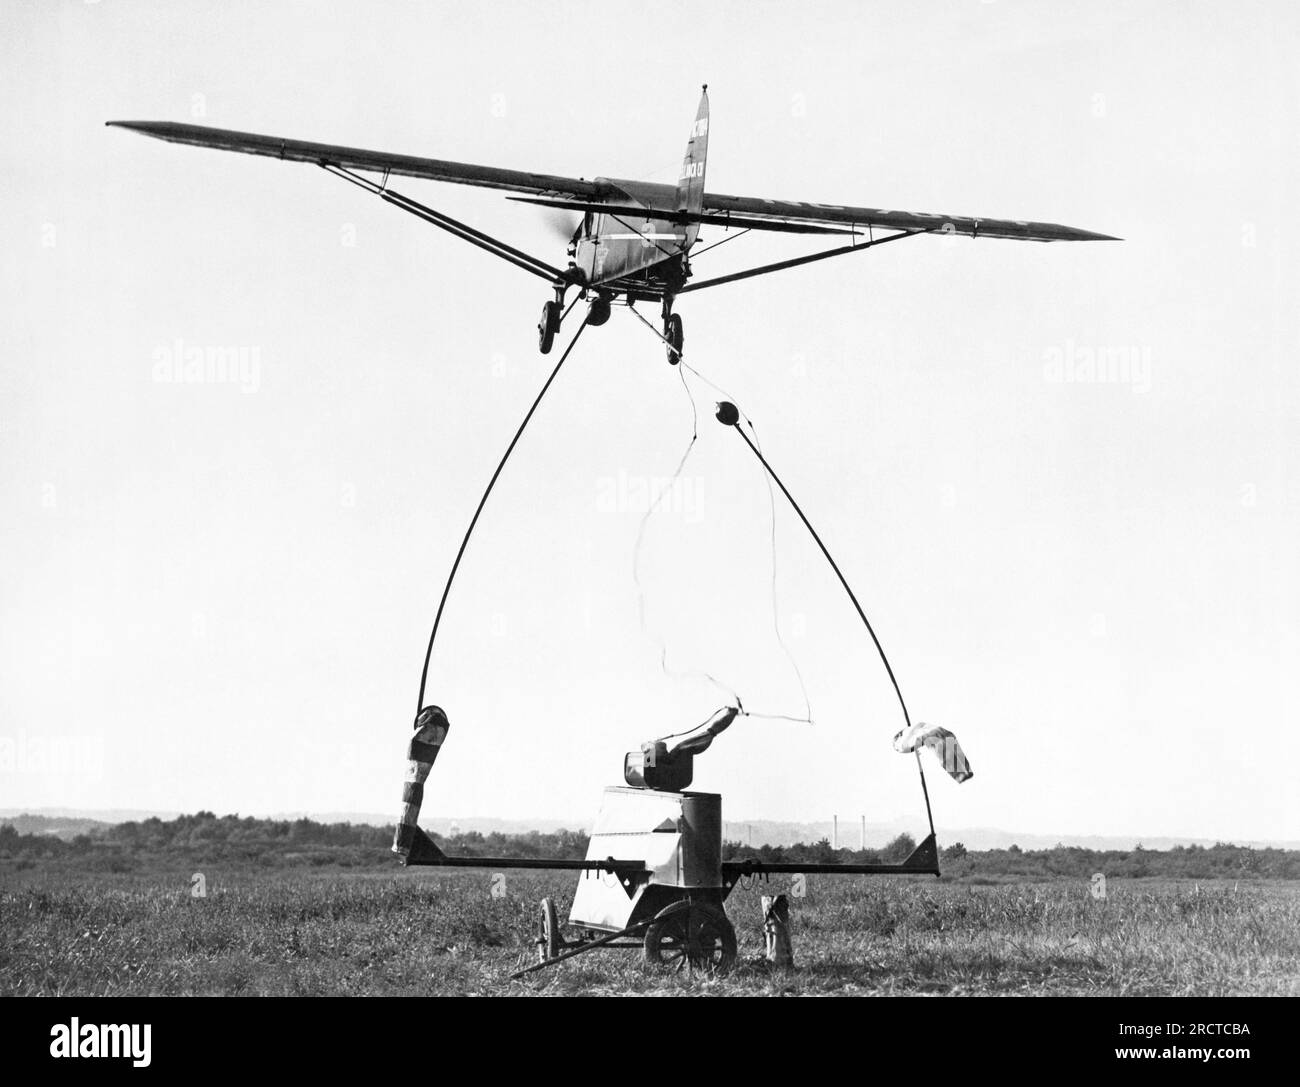 Washington, D.C.:  September 10, 1931 A new airmail pickup device was demonstrated at Washington Hoover Airport today. The airplane has snagged the cord suspended from the two poles on top of the truck and the catapult is projecting the mail bag into the air. Stock Photo